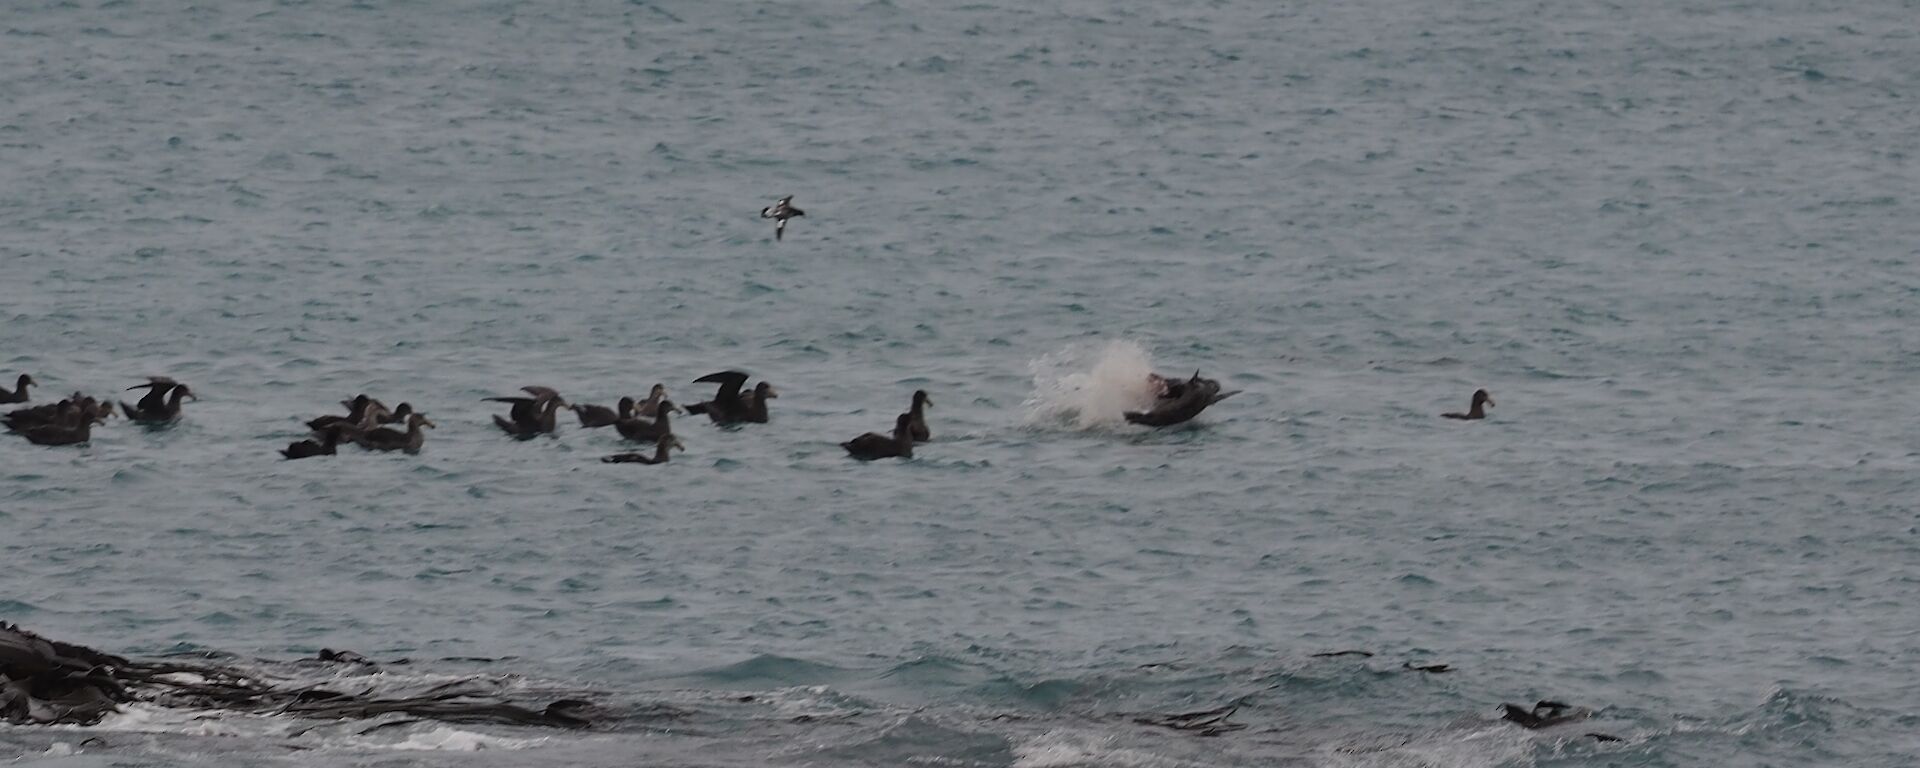 A Hookers sea lion with a young fur seal kill and surrounded by a flock of seabirds in Buckles Bay off Macquarie Island recently